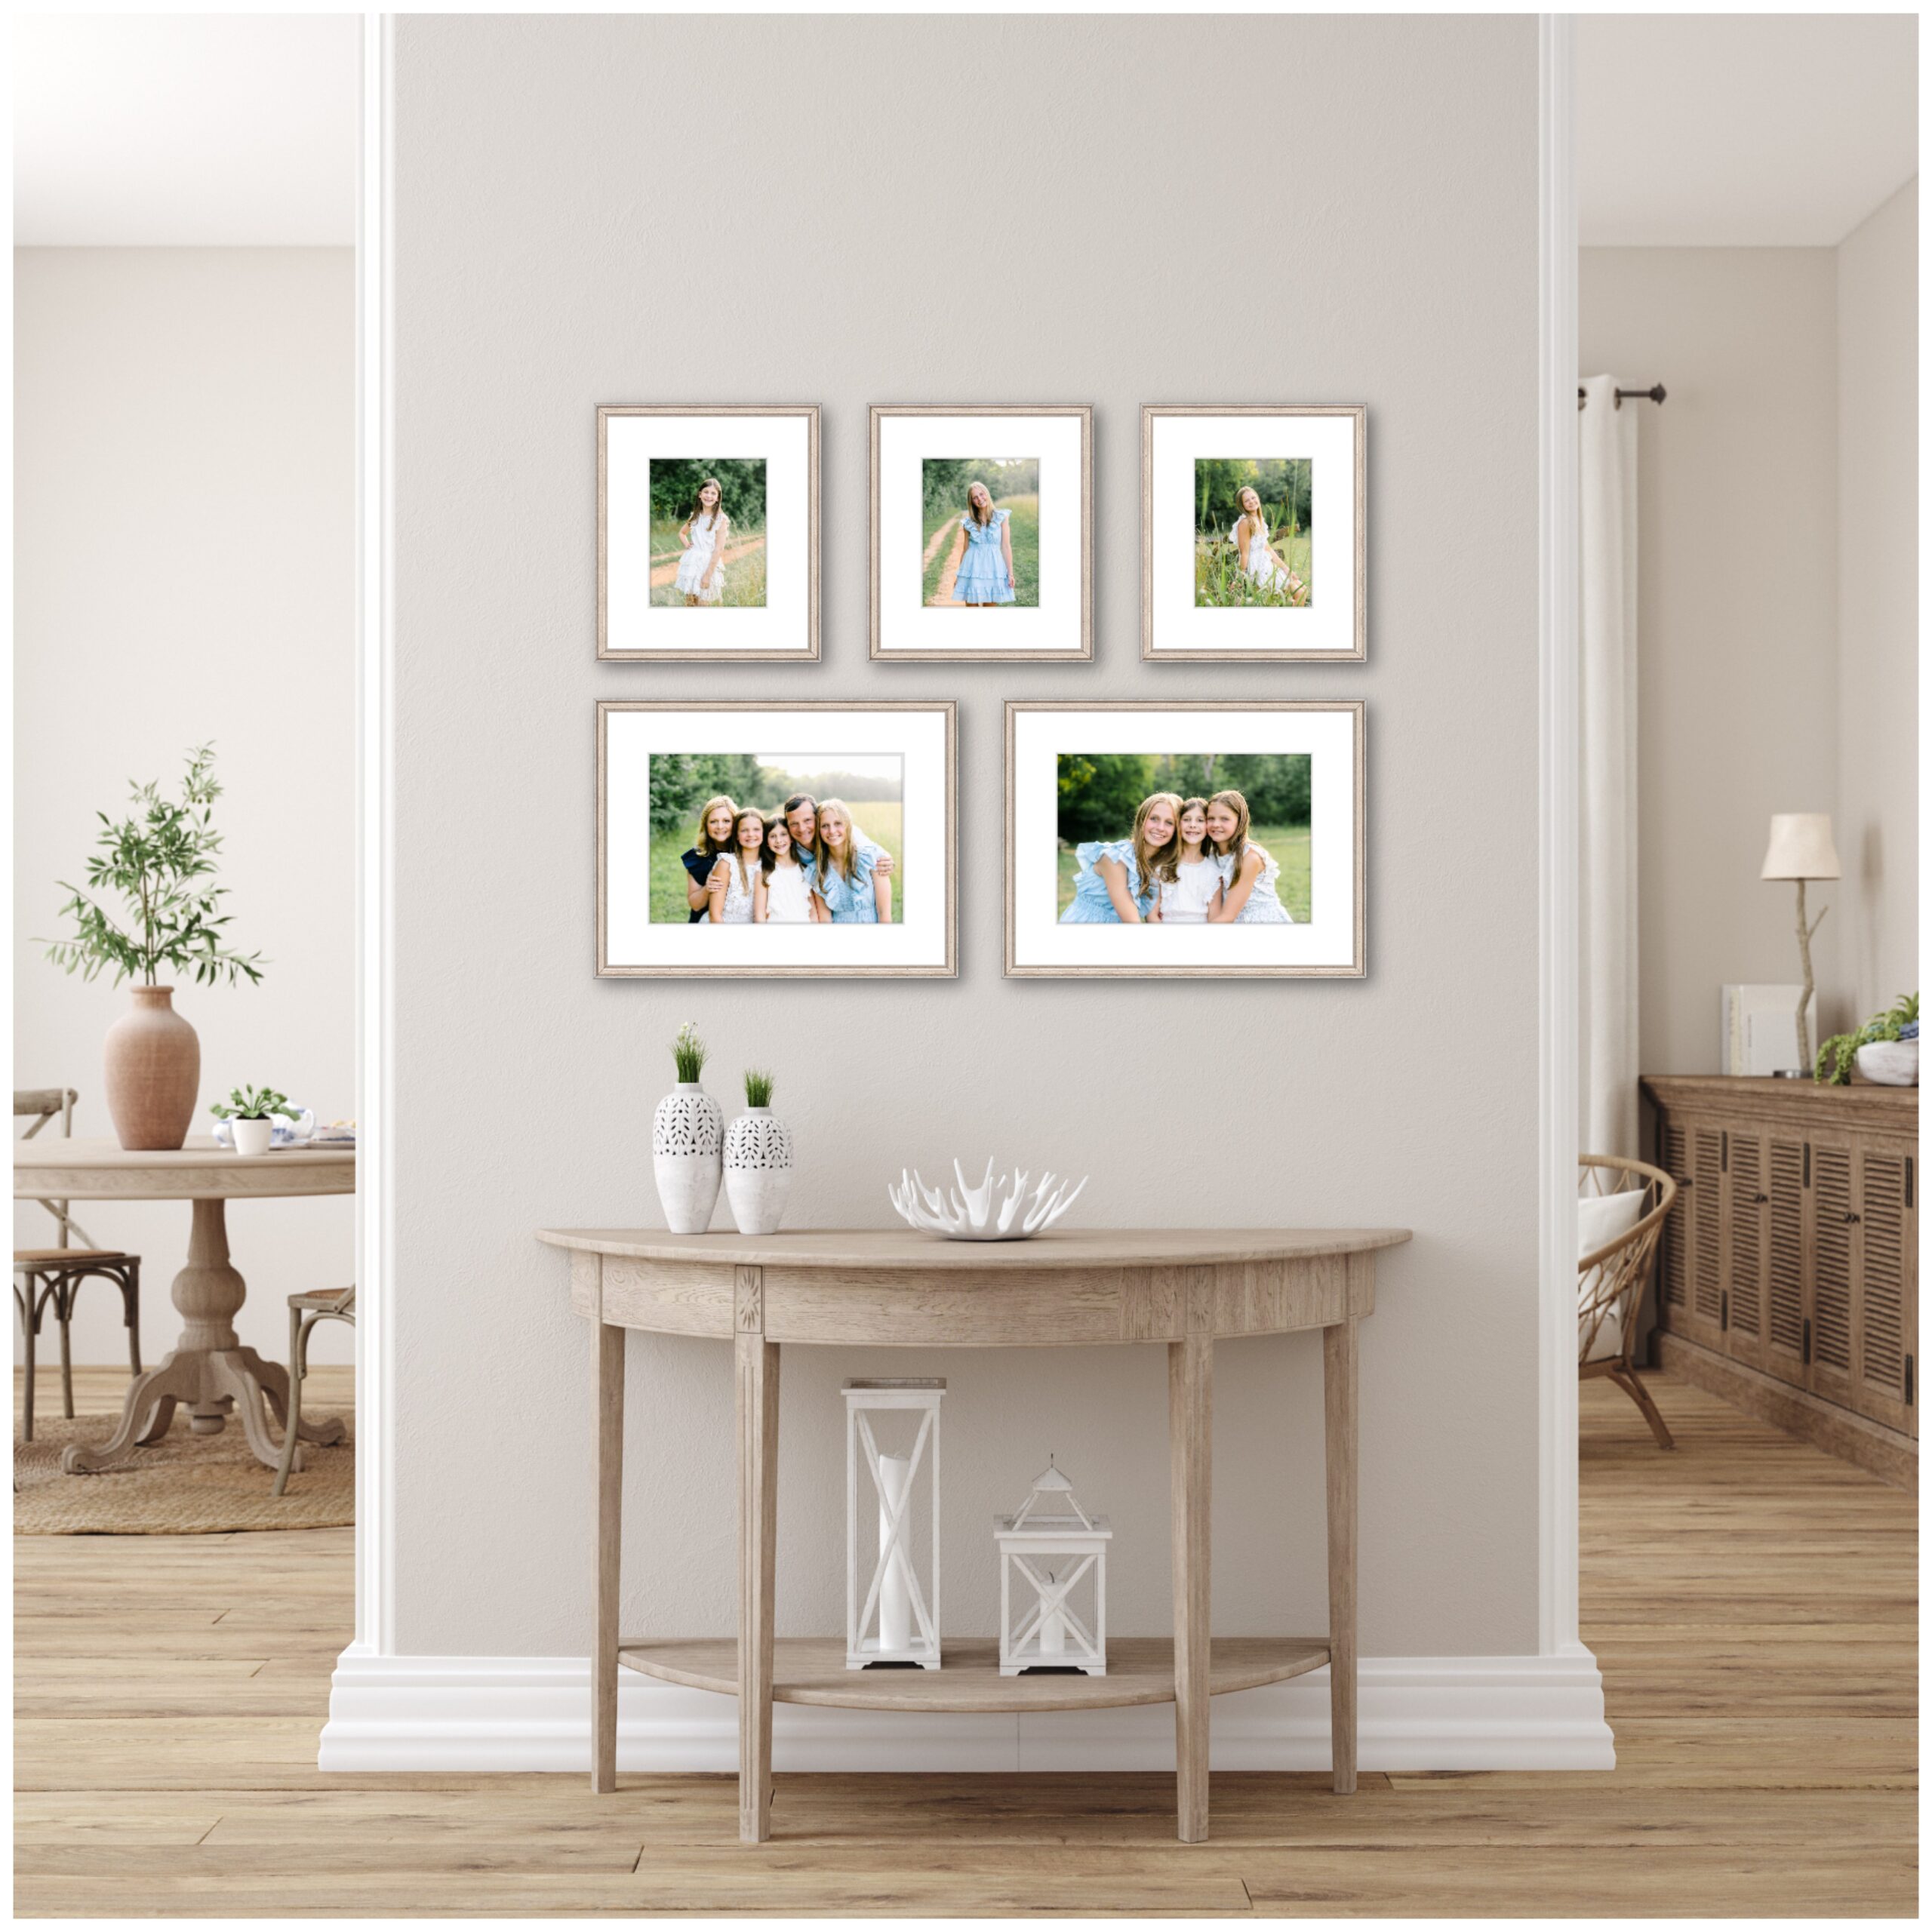 Gallery wall mockup by photographer in Atlanta Lindsey Powell Photography.